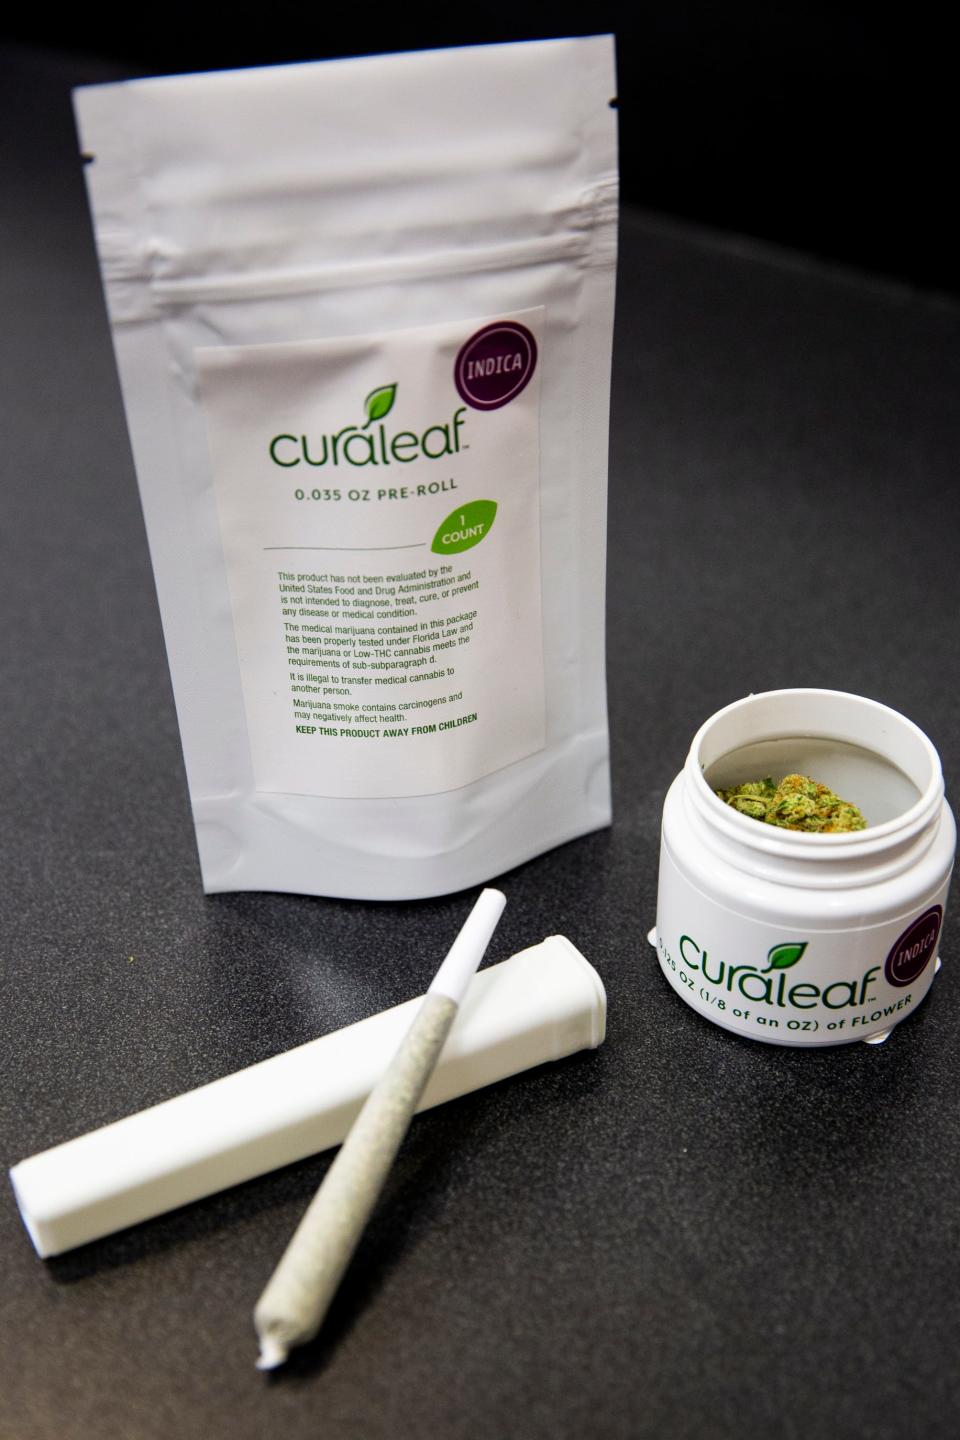 Medical marijuana flower, both loose and pre-rolled, is available at the Curaleaf dispensary in Bonita Springs.